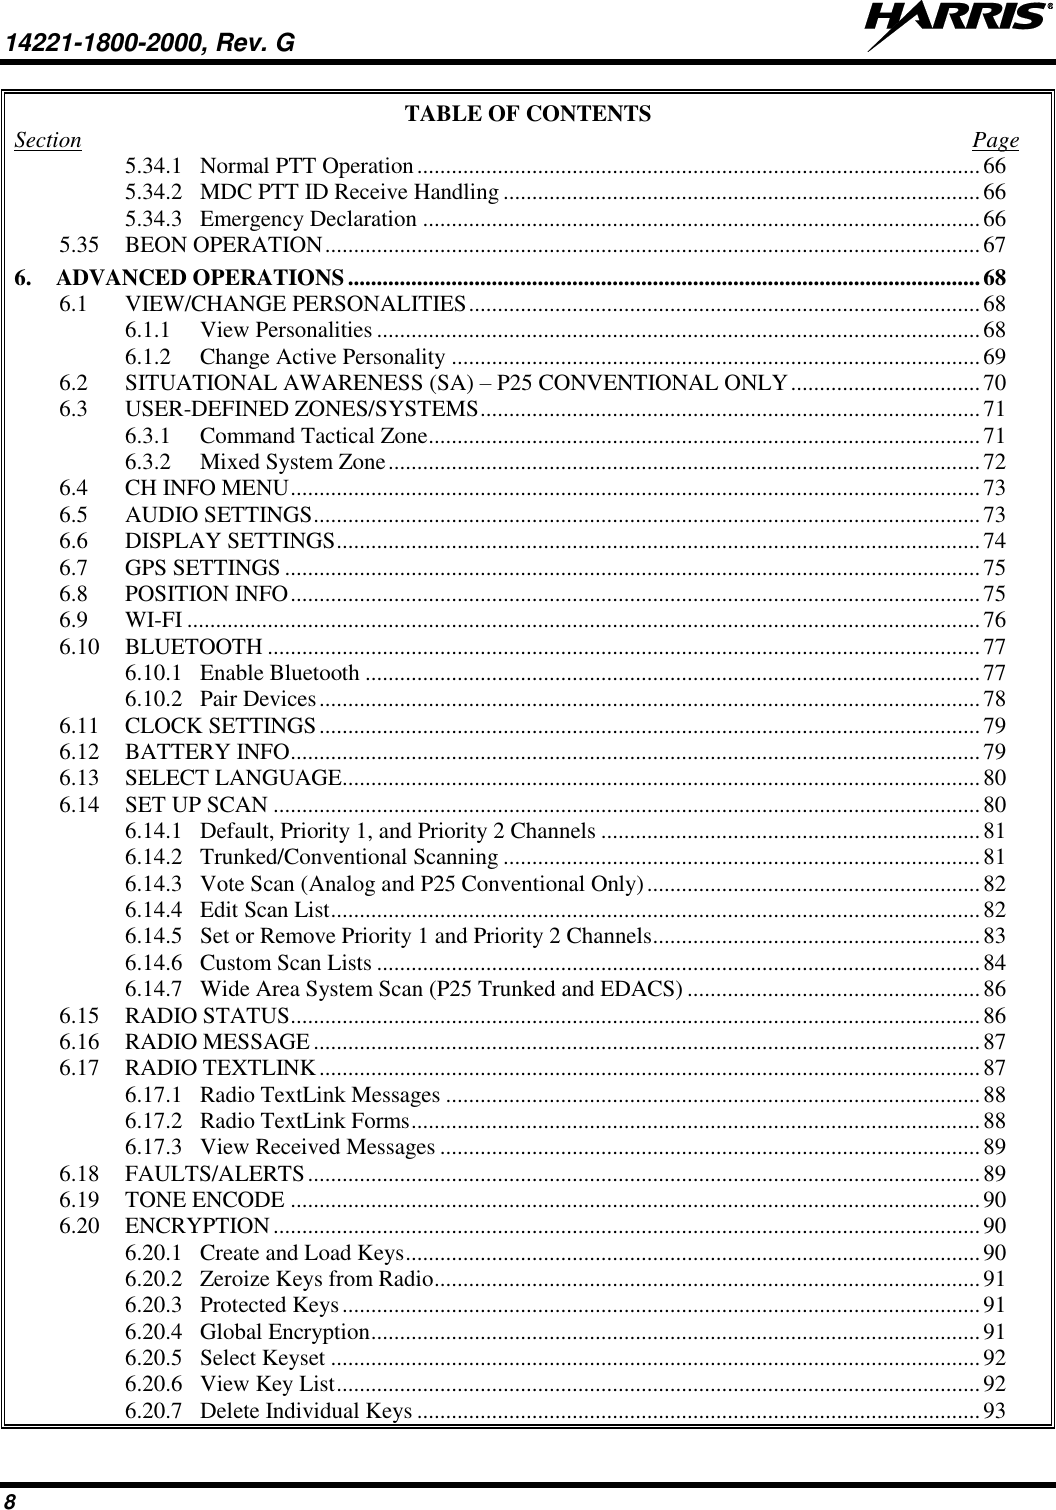 14221-1800-2000, Rev. G   8 TABLE OF CONTENTS Section  Page 5.34.1 Normal PTT Operation .................................................................................................. 66 5.34.2 MDC PTT ID Receive Handling ................................................................................... 66 5.34.3 Emergency Declaration ................................................................................................. 66 5.35 BEON OPERATION .................................................................................................................. 67 6. ADVANCED OPERATIONS .............................................................................................................. 68 6.1 VIEW/CHANGE PERSONALITIES ......................................................................................... 68 6.1.1 View Personalities ......................................................................................................... 68 6.1.2 Change Active Personality ............................................................................................ 69 6.2 SITUATIONAL AWARENESS (SA) – P25 CONVENTIONAL ONLY ................................. 70 6.3 USER-DEFINED ZONES/SYSTEMS ....................................................................................... 71 6.3.1 Command Tactical Zone ................................................................................................ 71 6.3.2 Mixed System Zone ....................................................................................................... 72 6.4 CH INFO MENU ........................................................................................................................ 73 6.5 AUDIO SETTINGS .................................................................................................................... 73 6.6 DISPLAY SETTINGS ................................................................................................................ 74 6.7 GPS SETTINGS ......................................................................................................................... 75 6.8 POSITION INFO ........................................................................................................................ 75 6.9 WI-FI .......................................................................................................................................... 76 6.10 BLUETOOTH ............................................................................................................................ 77 6.10.1 Enable Bluetooth ........................................................................................................... 77 6.10.2 Pair Devices ................................................................................................................... 78 6.11 CLOCK SETTINGS ................................................................................................................... 79 6.12 BATTERY INFO ........................................................................................................................ 79 6.13 SELECT LANGUAGE............................................................................................................... 80 6.14 SET UP SCAN ........................................................................................................................... 80 6.14.1 Default, Priority 1, and Priority 2 Channels .................................................................. 81 6.14.2 Trunked/Conventional Scanning ................................................................................... 81 6.14.3 Vote Scan (Analog and P25 Conventional Only) .......................................................... 82 6.14.4 Edit Scan List ................................................................................................................. 82 6.14.5 Set or Remove Priority 1 and Priority 2 Channels ......................................................... 83 6.14.6 Custom Scan Lists ......................................................................................................... 84 6.14.7 Wide Area System Scan (P25 Trunked and EDACS) ................................................... 86 6.15 RADIO STATUS ........................................................................................................................ 86 6.16 RADIO MESSAGE .................................................................................................................... 87 6.17 RADIO TEXTLINK ................................................................................................................... 87 6.17.1 Radio TextLink Messages ............................................................................................. 88 6.17.2 Radio TextLink Forms ................................................................................................... 88 6.17.3 View Received Messages .............................................................................................. 89 6.18 FAULTS/ALERTS ..................................................................................................................... 89 6.19 TONE ENCODE ........................................................................................................................ 90 6.20 ENCRYPTION ........................................................................................................................... 90 6.20.1 Create and Load Keys .................................................................................................... 90 6.20.2 Zeroize Keys from Radio ............................................................................................... 91 6.20.3 Protected Keys ............................................................................................................... 91 6.20.4 Global Encryption .......................................................................................................... 91 6.20.5 Select Keyset ................................................................................................................. 92 6.20.6 View Key List ................................................................................................................ 92 6.20.7 Delete Individual Keys .................................................................................................. 93 